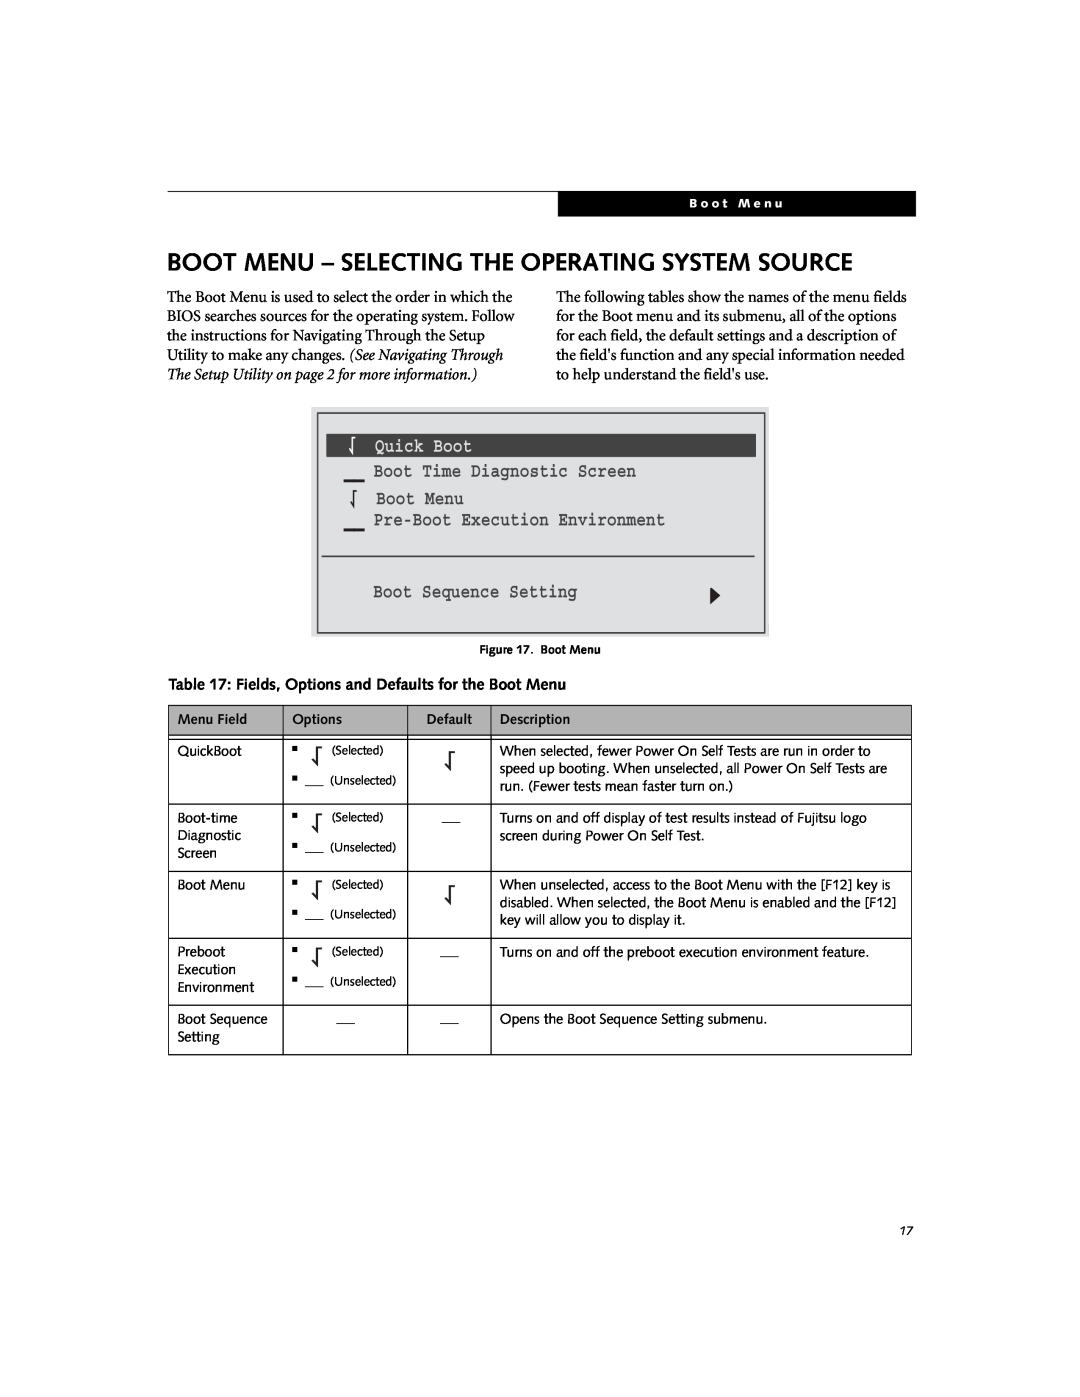 Fujitsu Siemens Computers N3520 Boot Menu - Selecting The Operating System Source, Screen, Environment, Speed, L1 Cache 